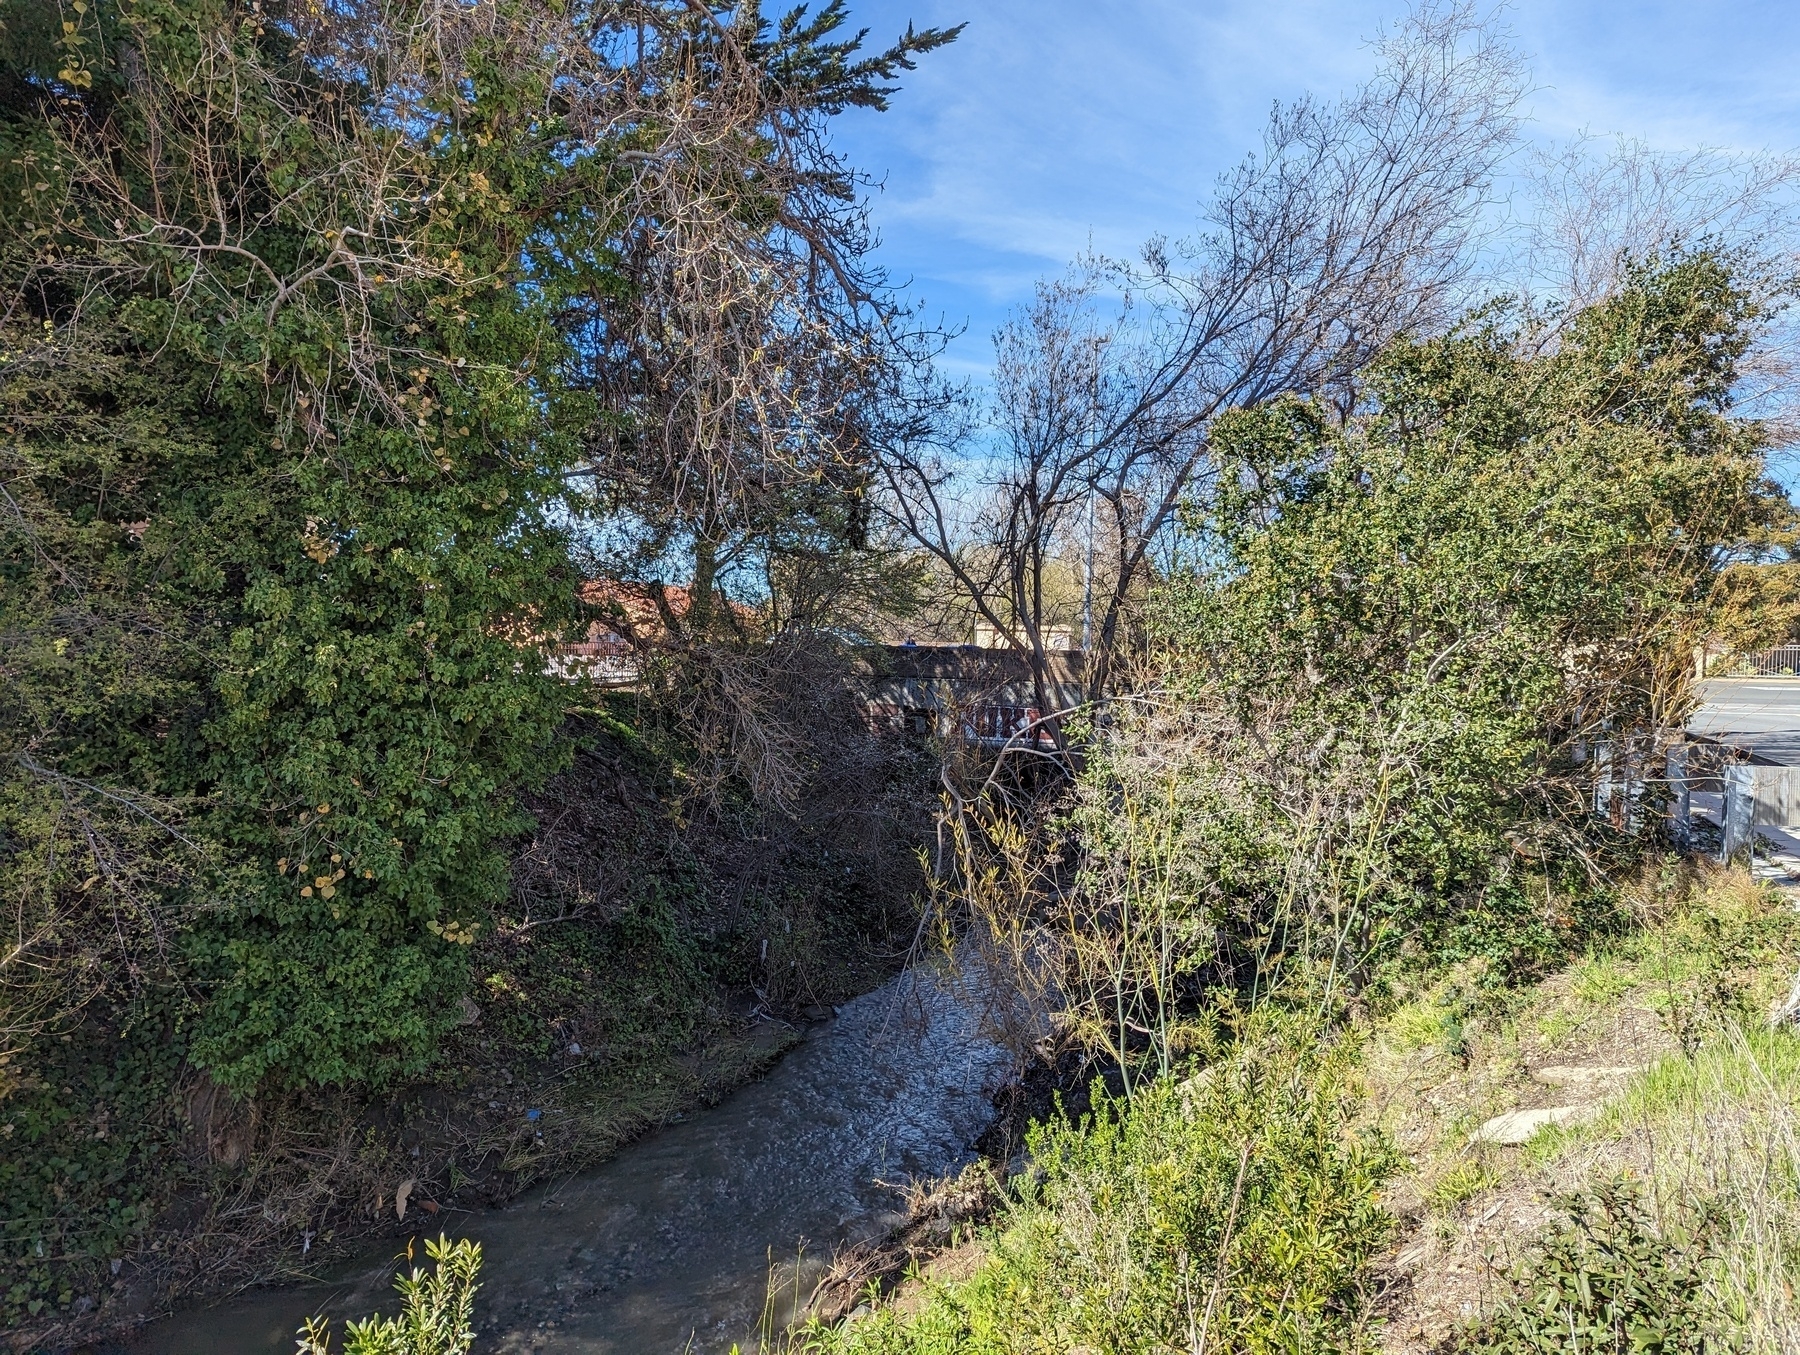 A view of the tree lined and mulch and greenery banked Wildcat Creek from the greenway trail Thursday, March 2, 2023 near Church Lane in San Pablo, California.